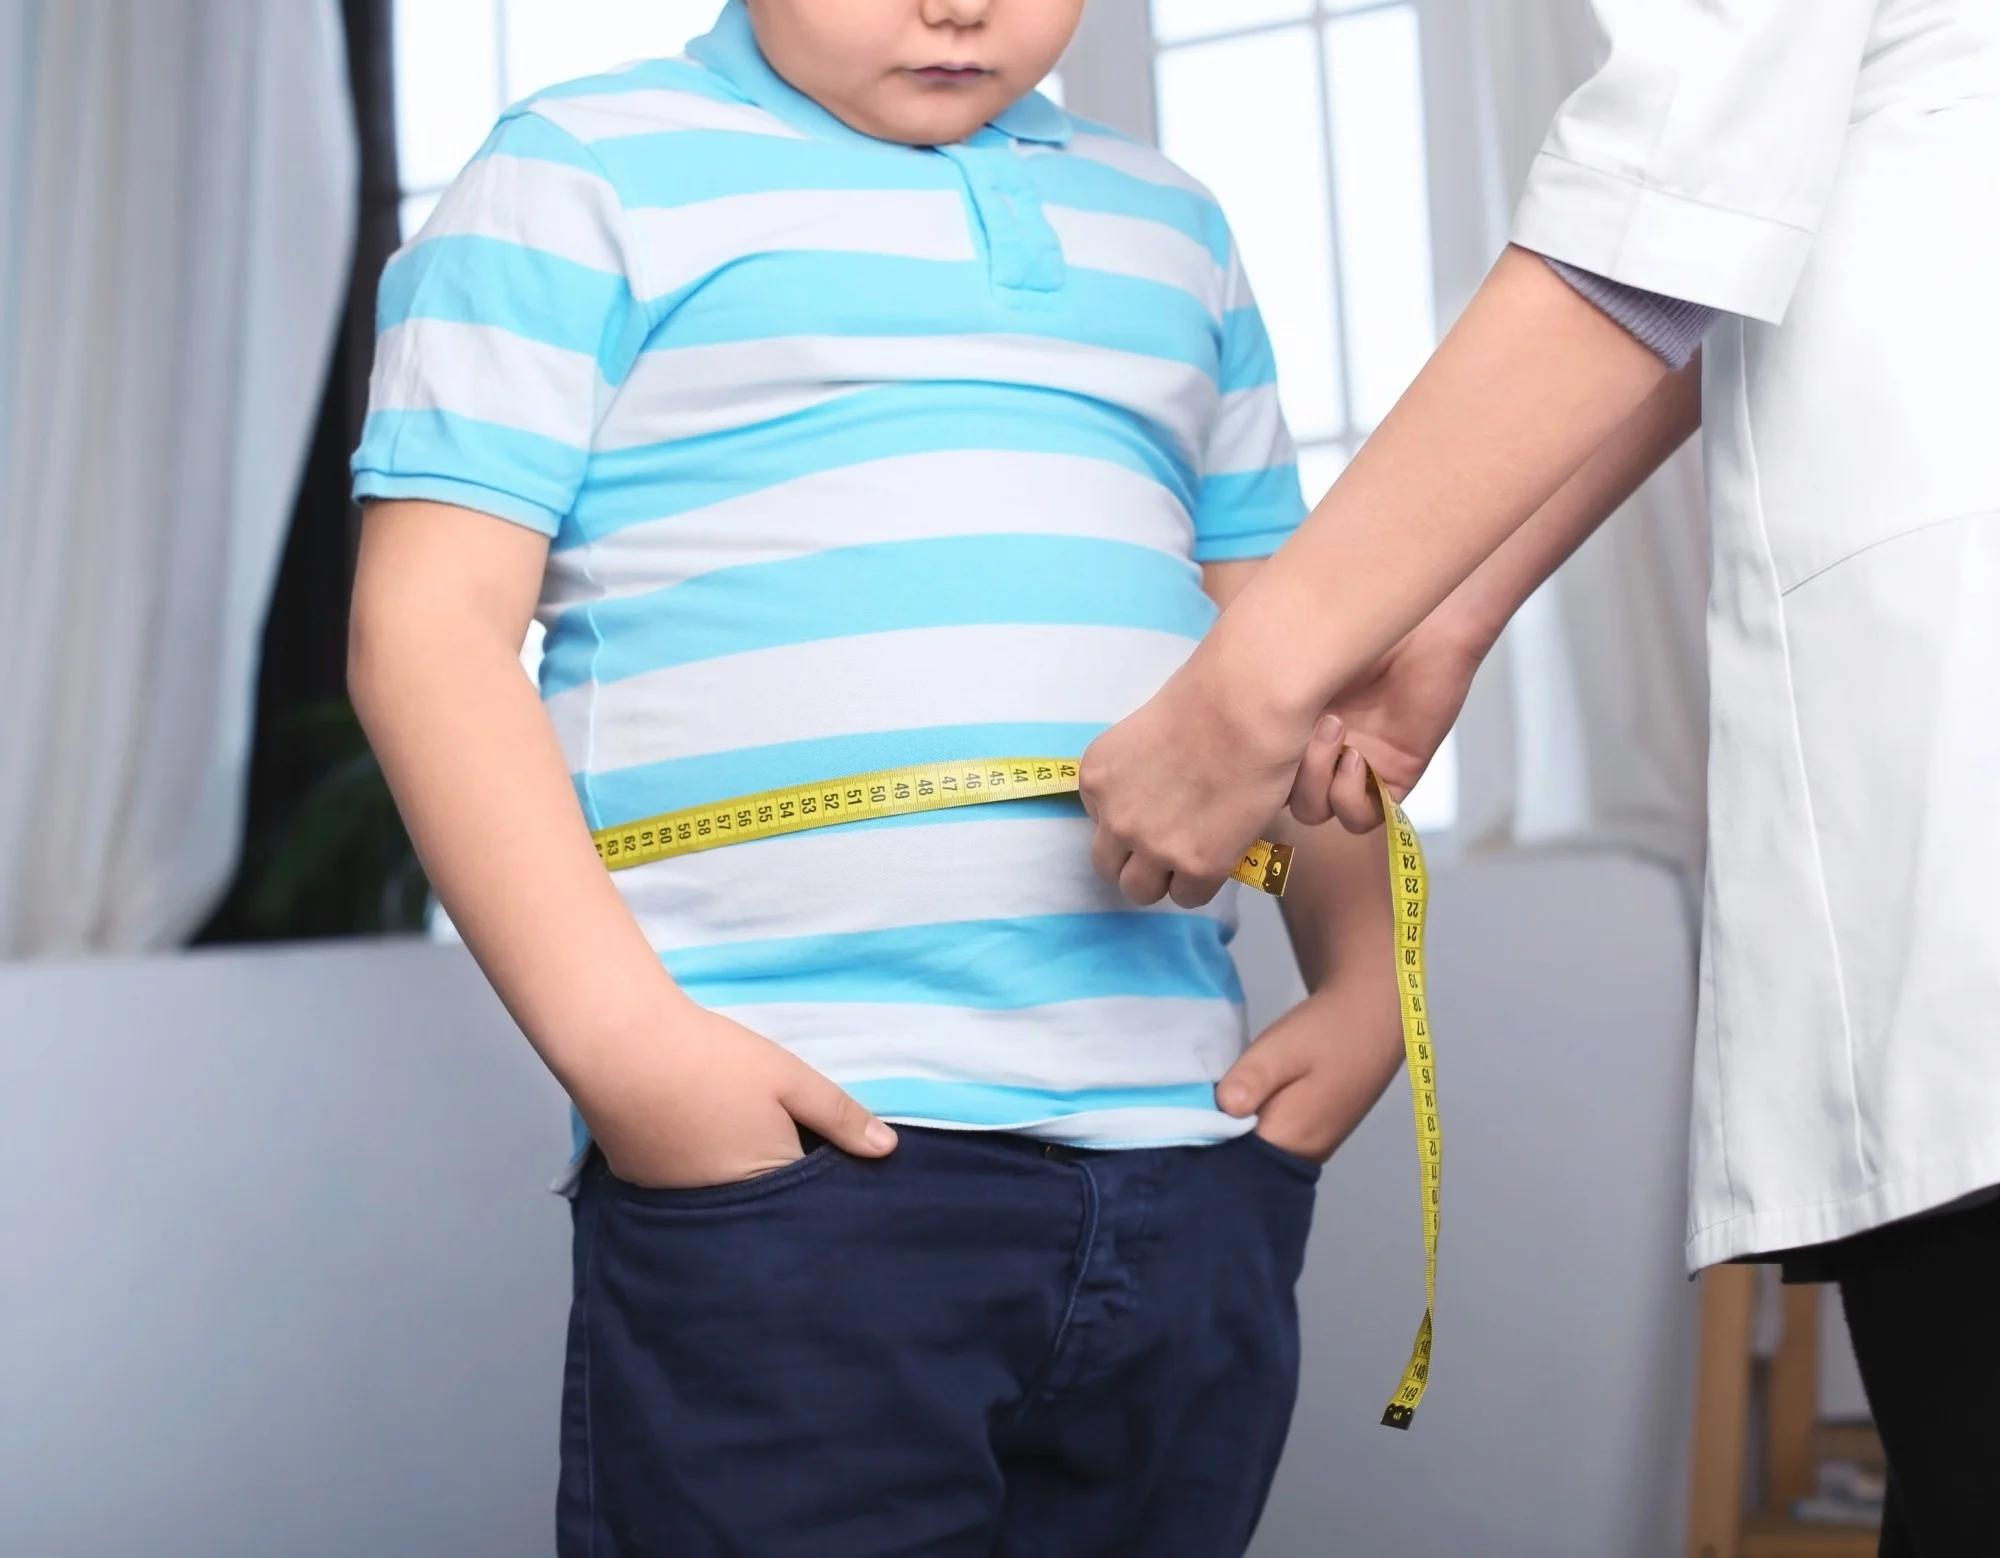 What Are The Best Diet Pills For Kids?